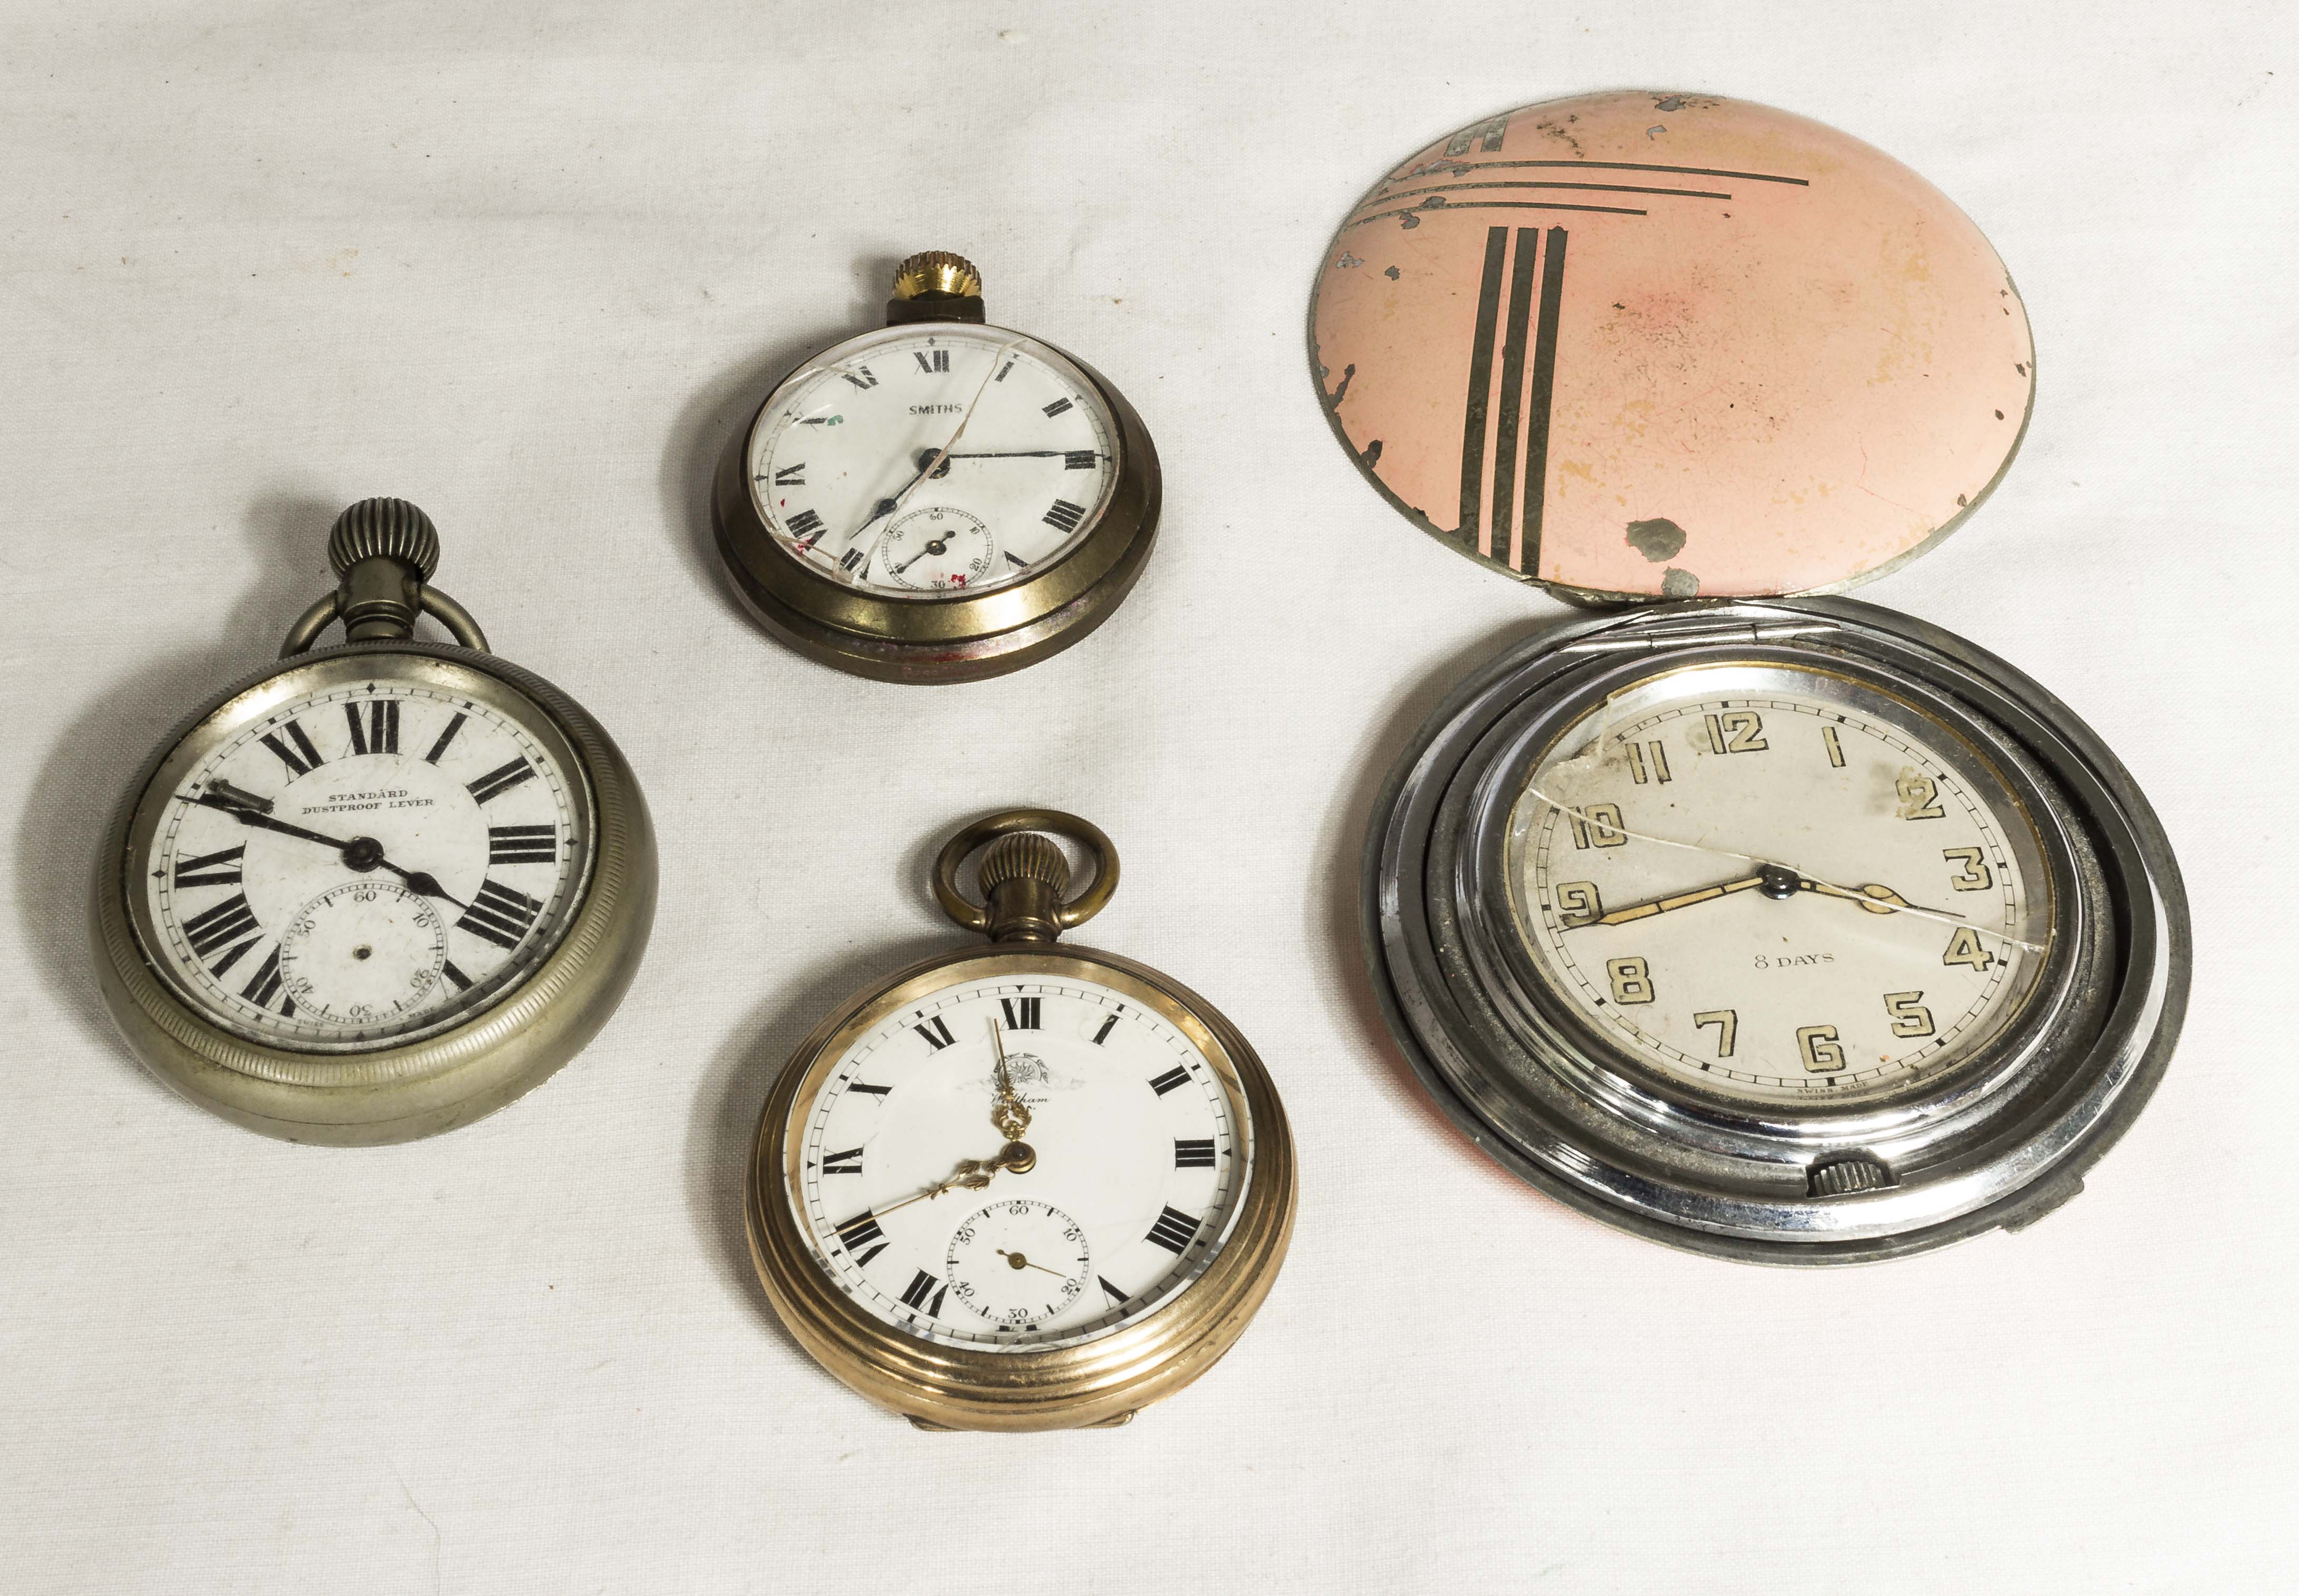 Three pocket watches and one Art Deco style watch